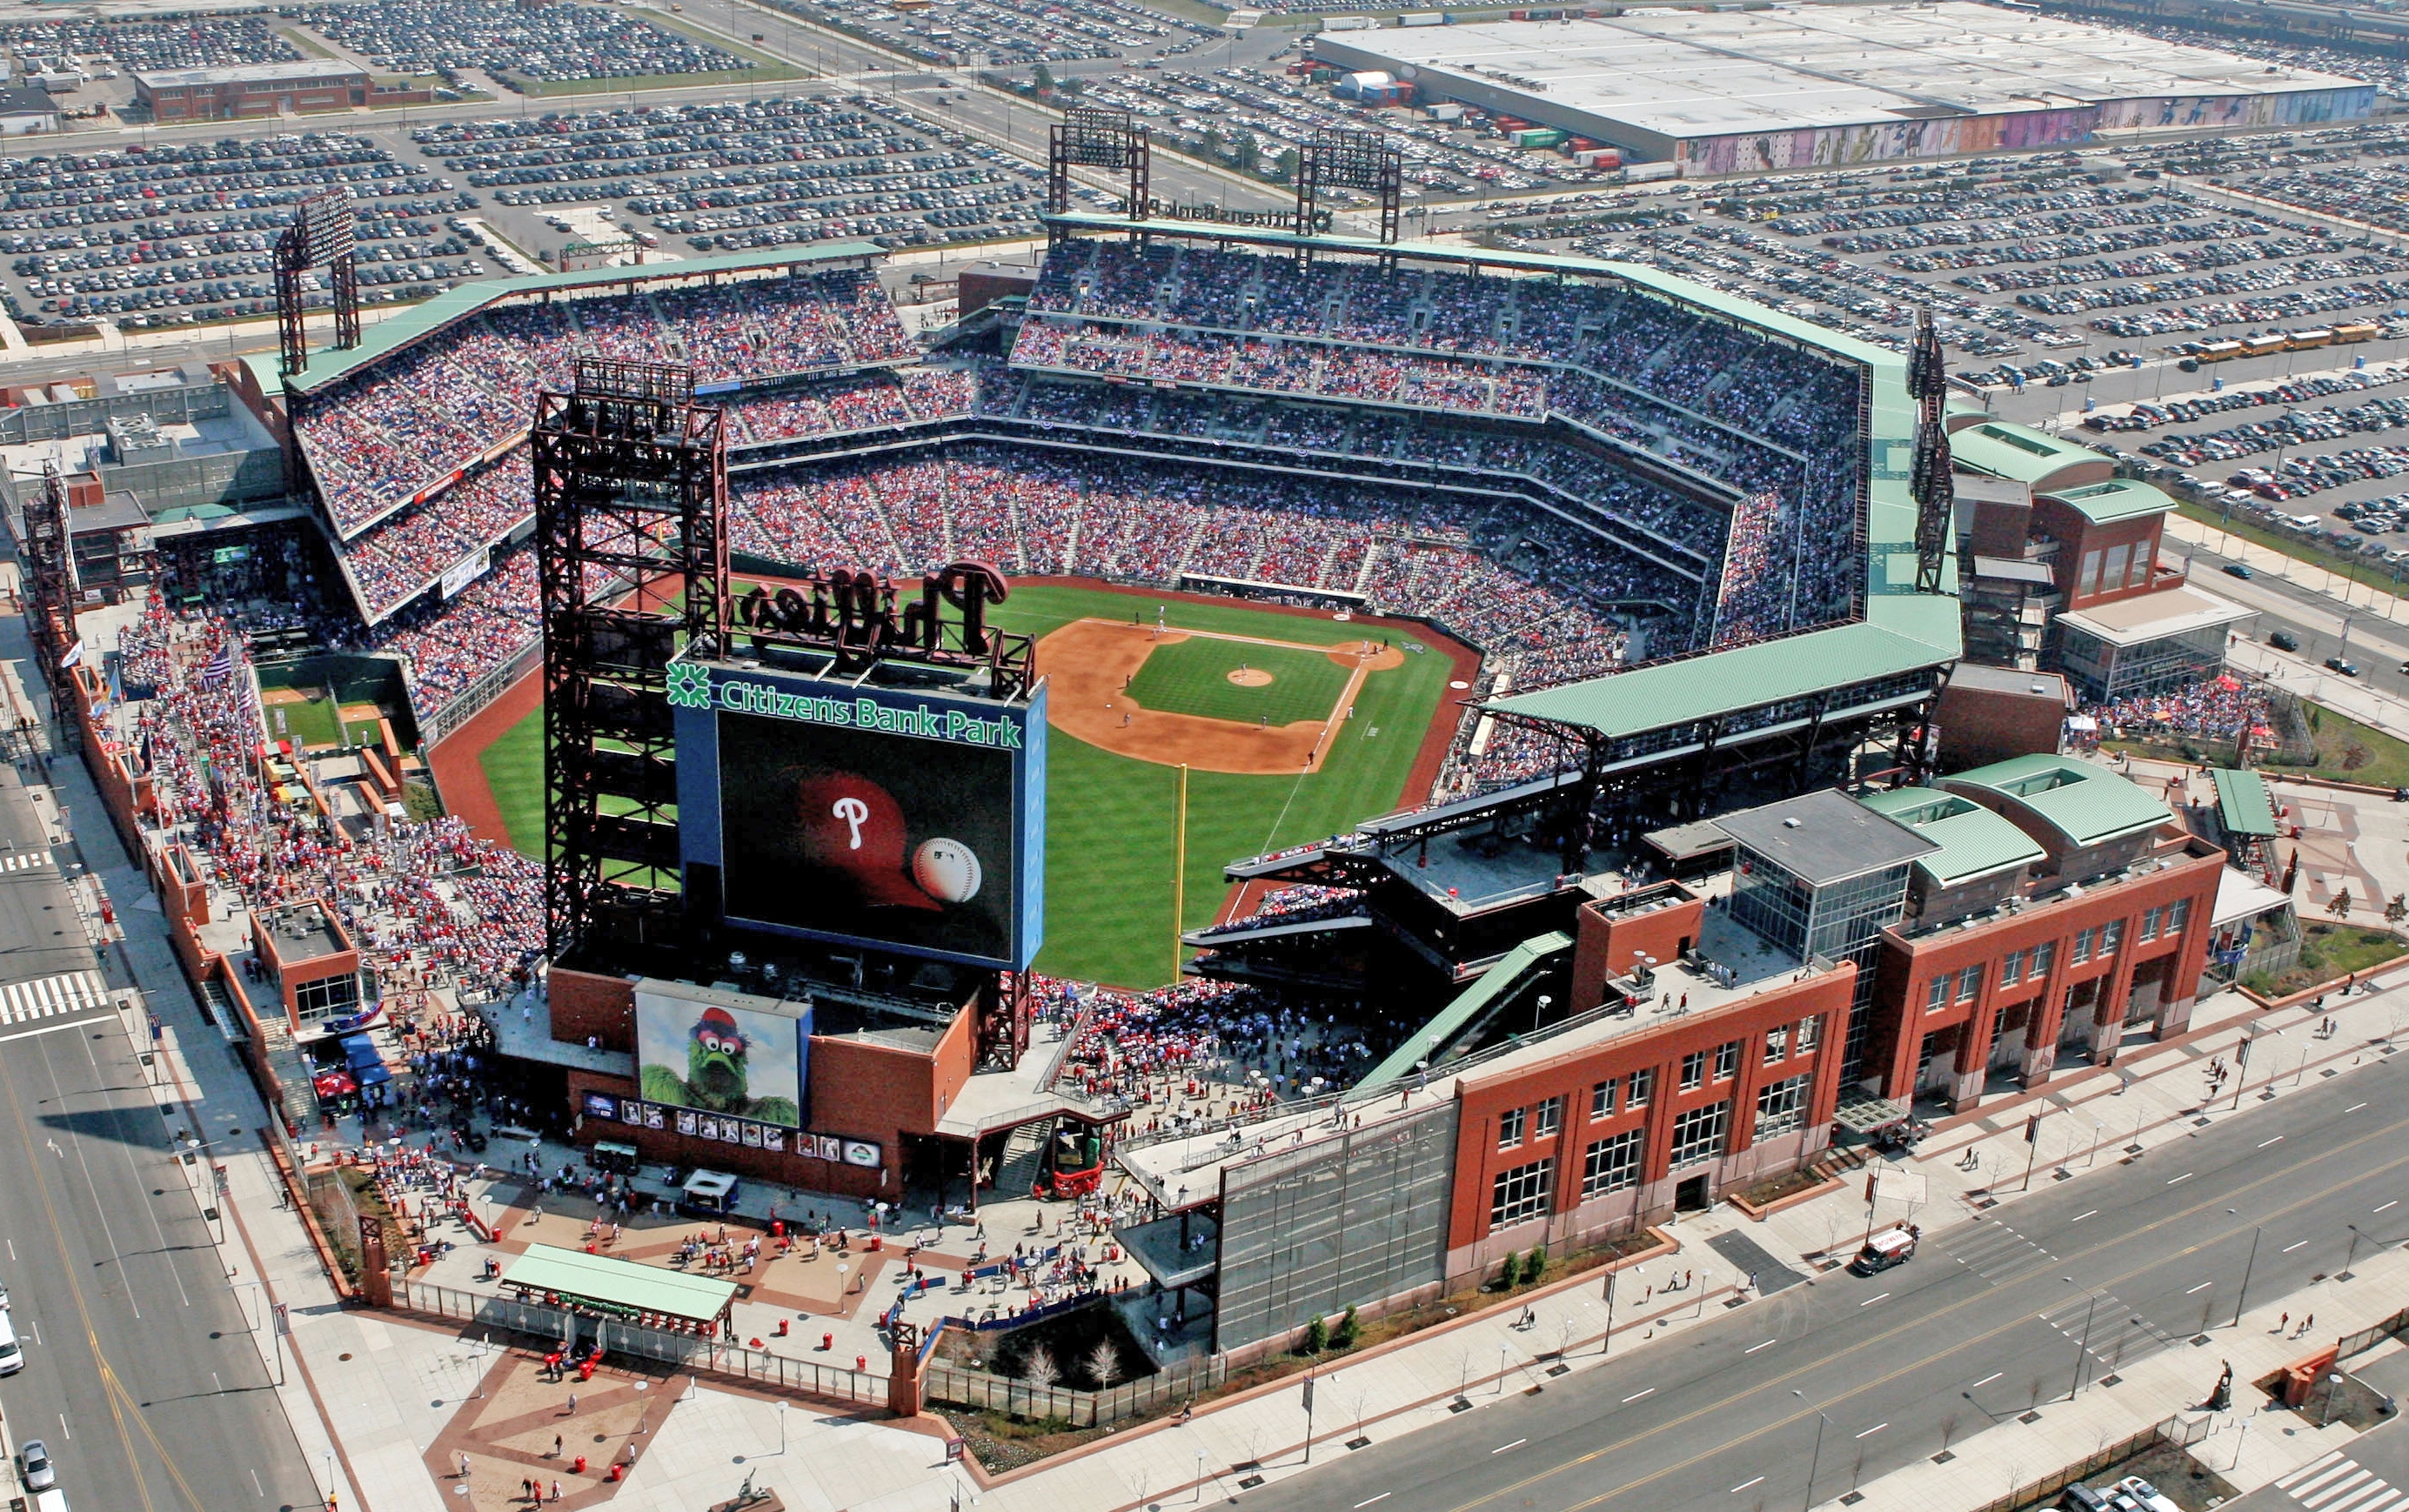 Where to park at Citizens Bank Park